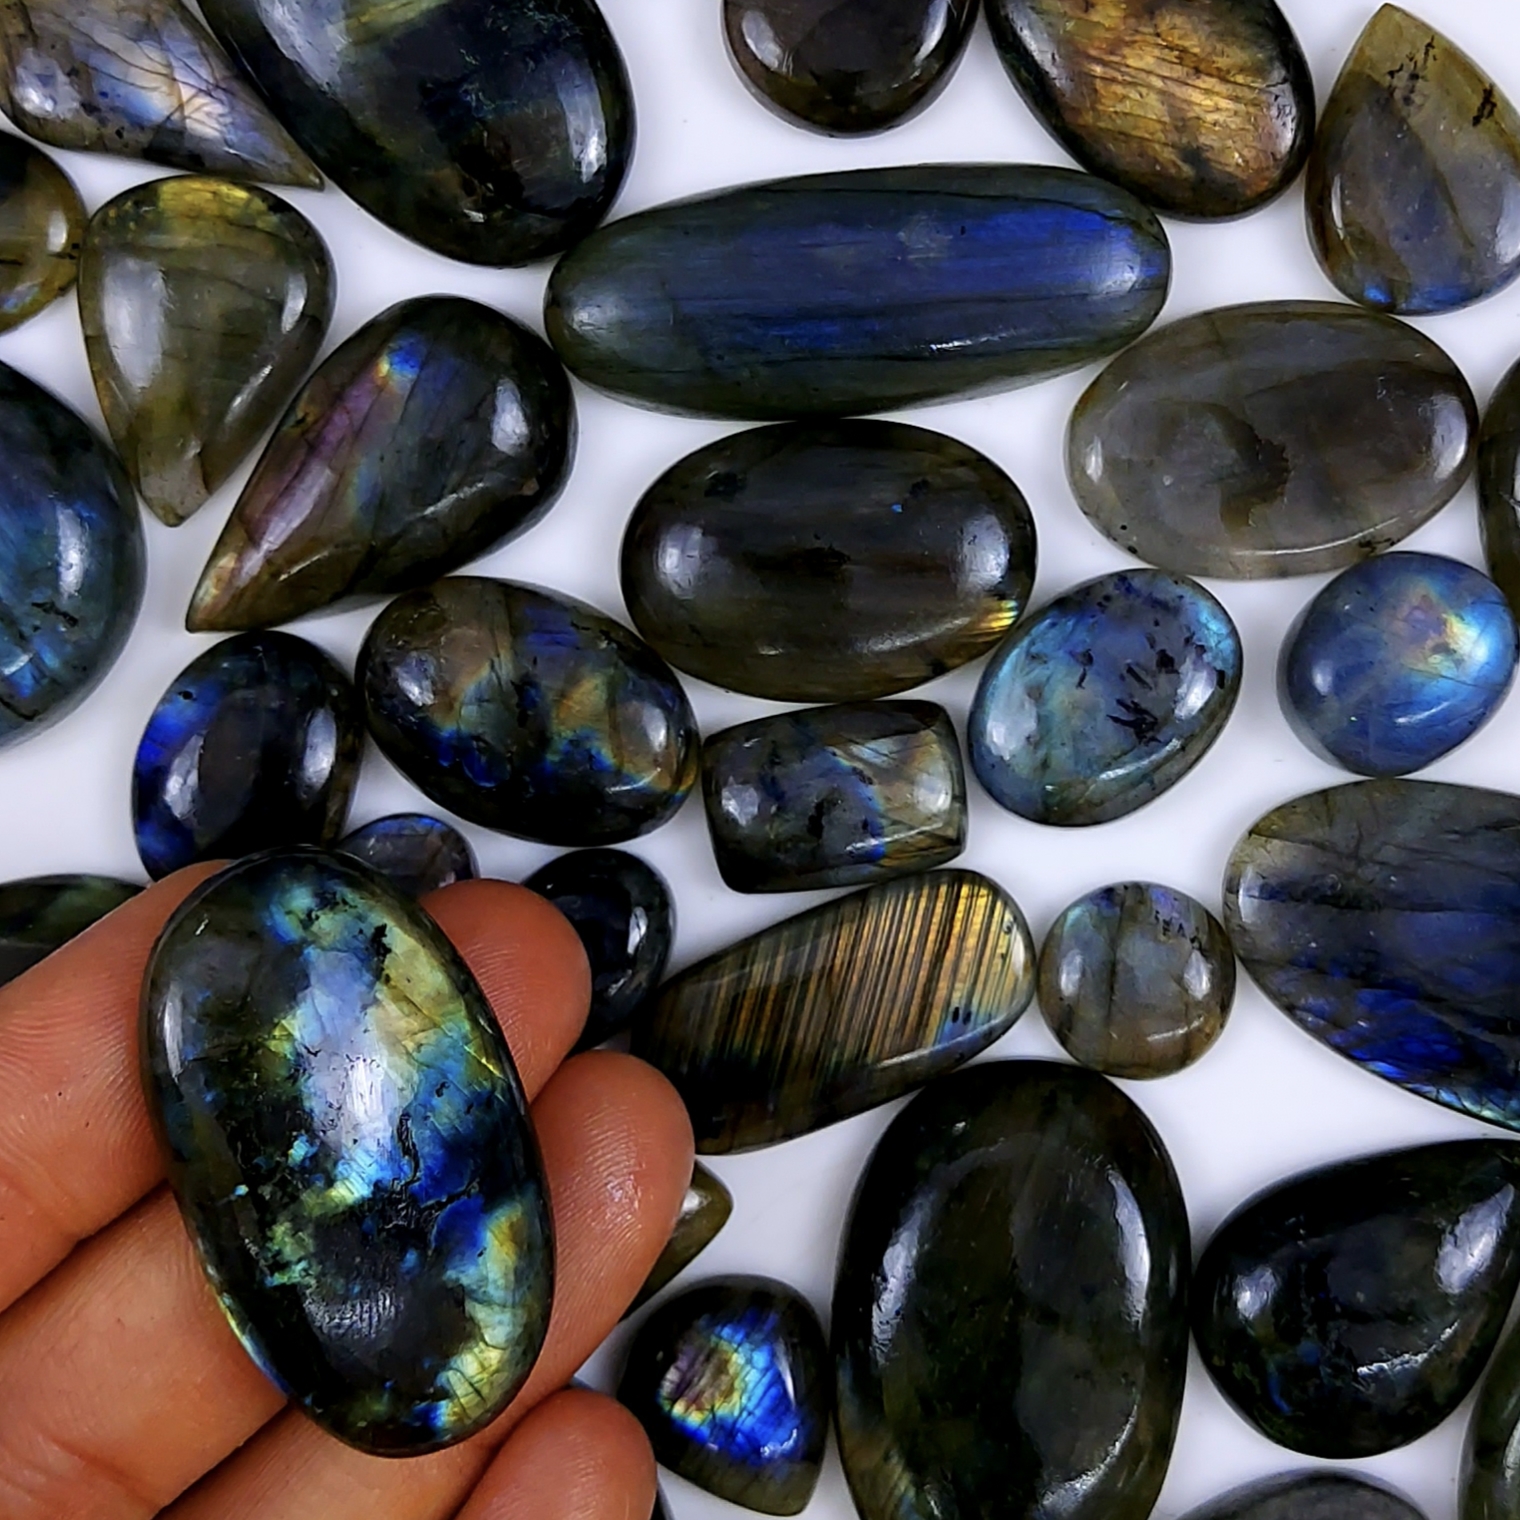 43pc 1537Cts Labradorite Cabochon Multifire Healing Crystal For Jewelry Supplies, Labradorite Necklace Handmade Wire Wrapped Gemstone Pendant 44x28 20x16mm#6329